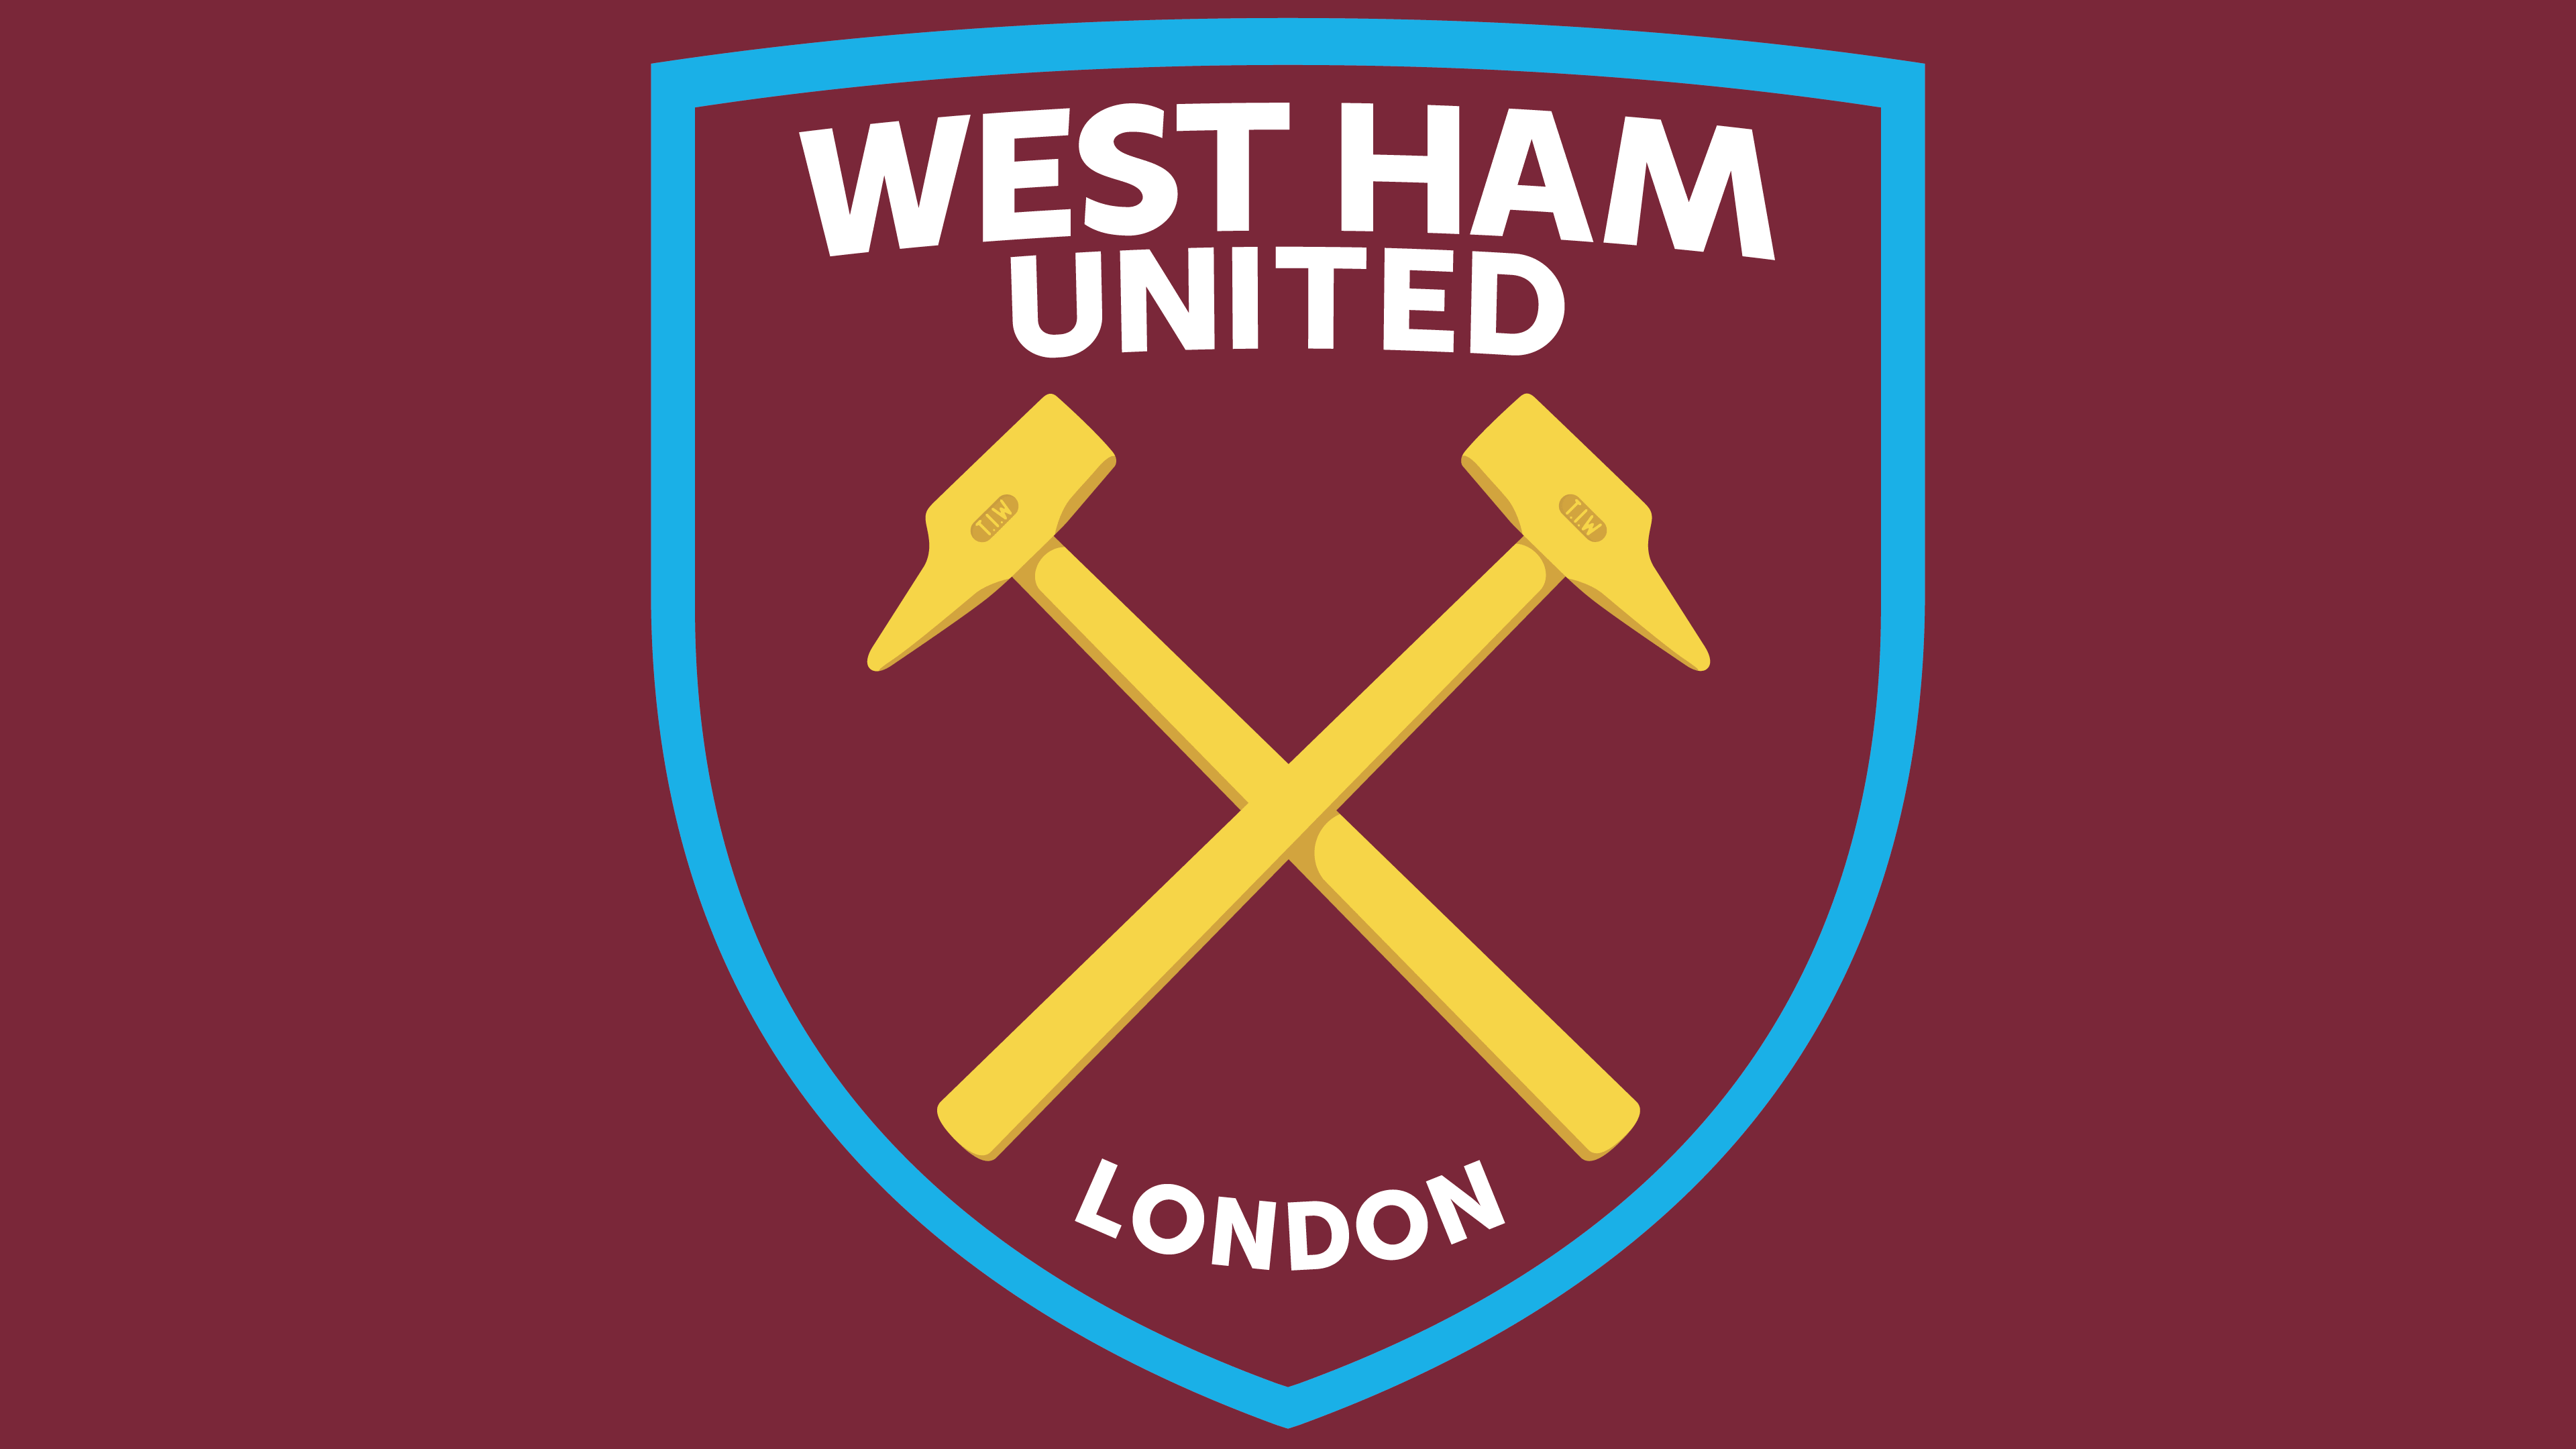 West Ham - The Hammers